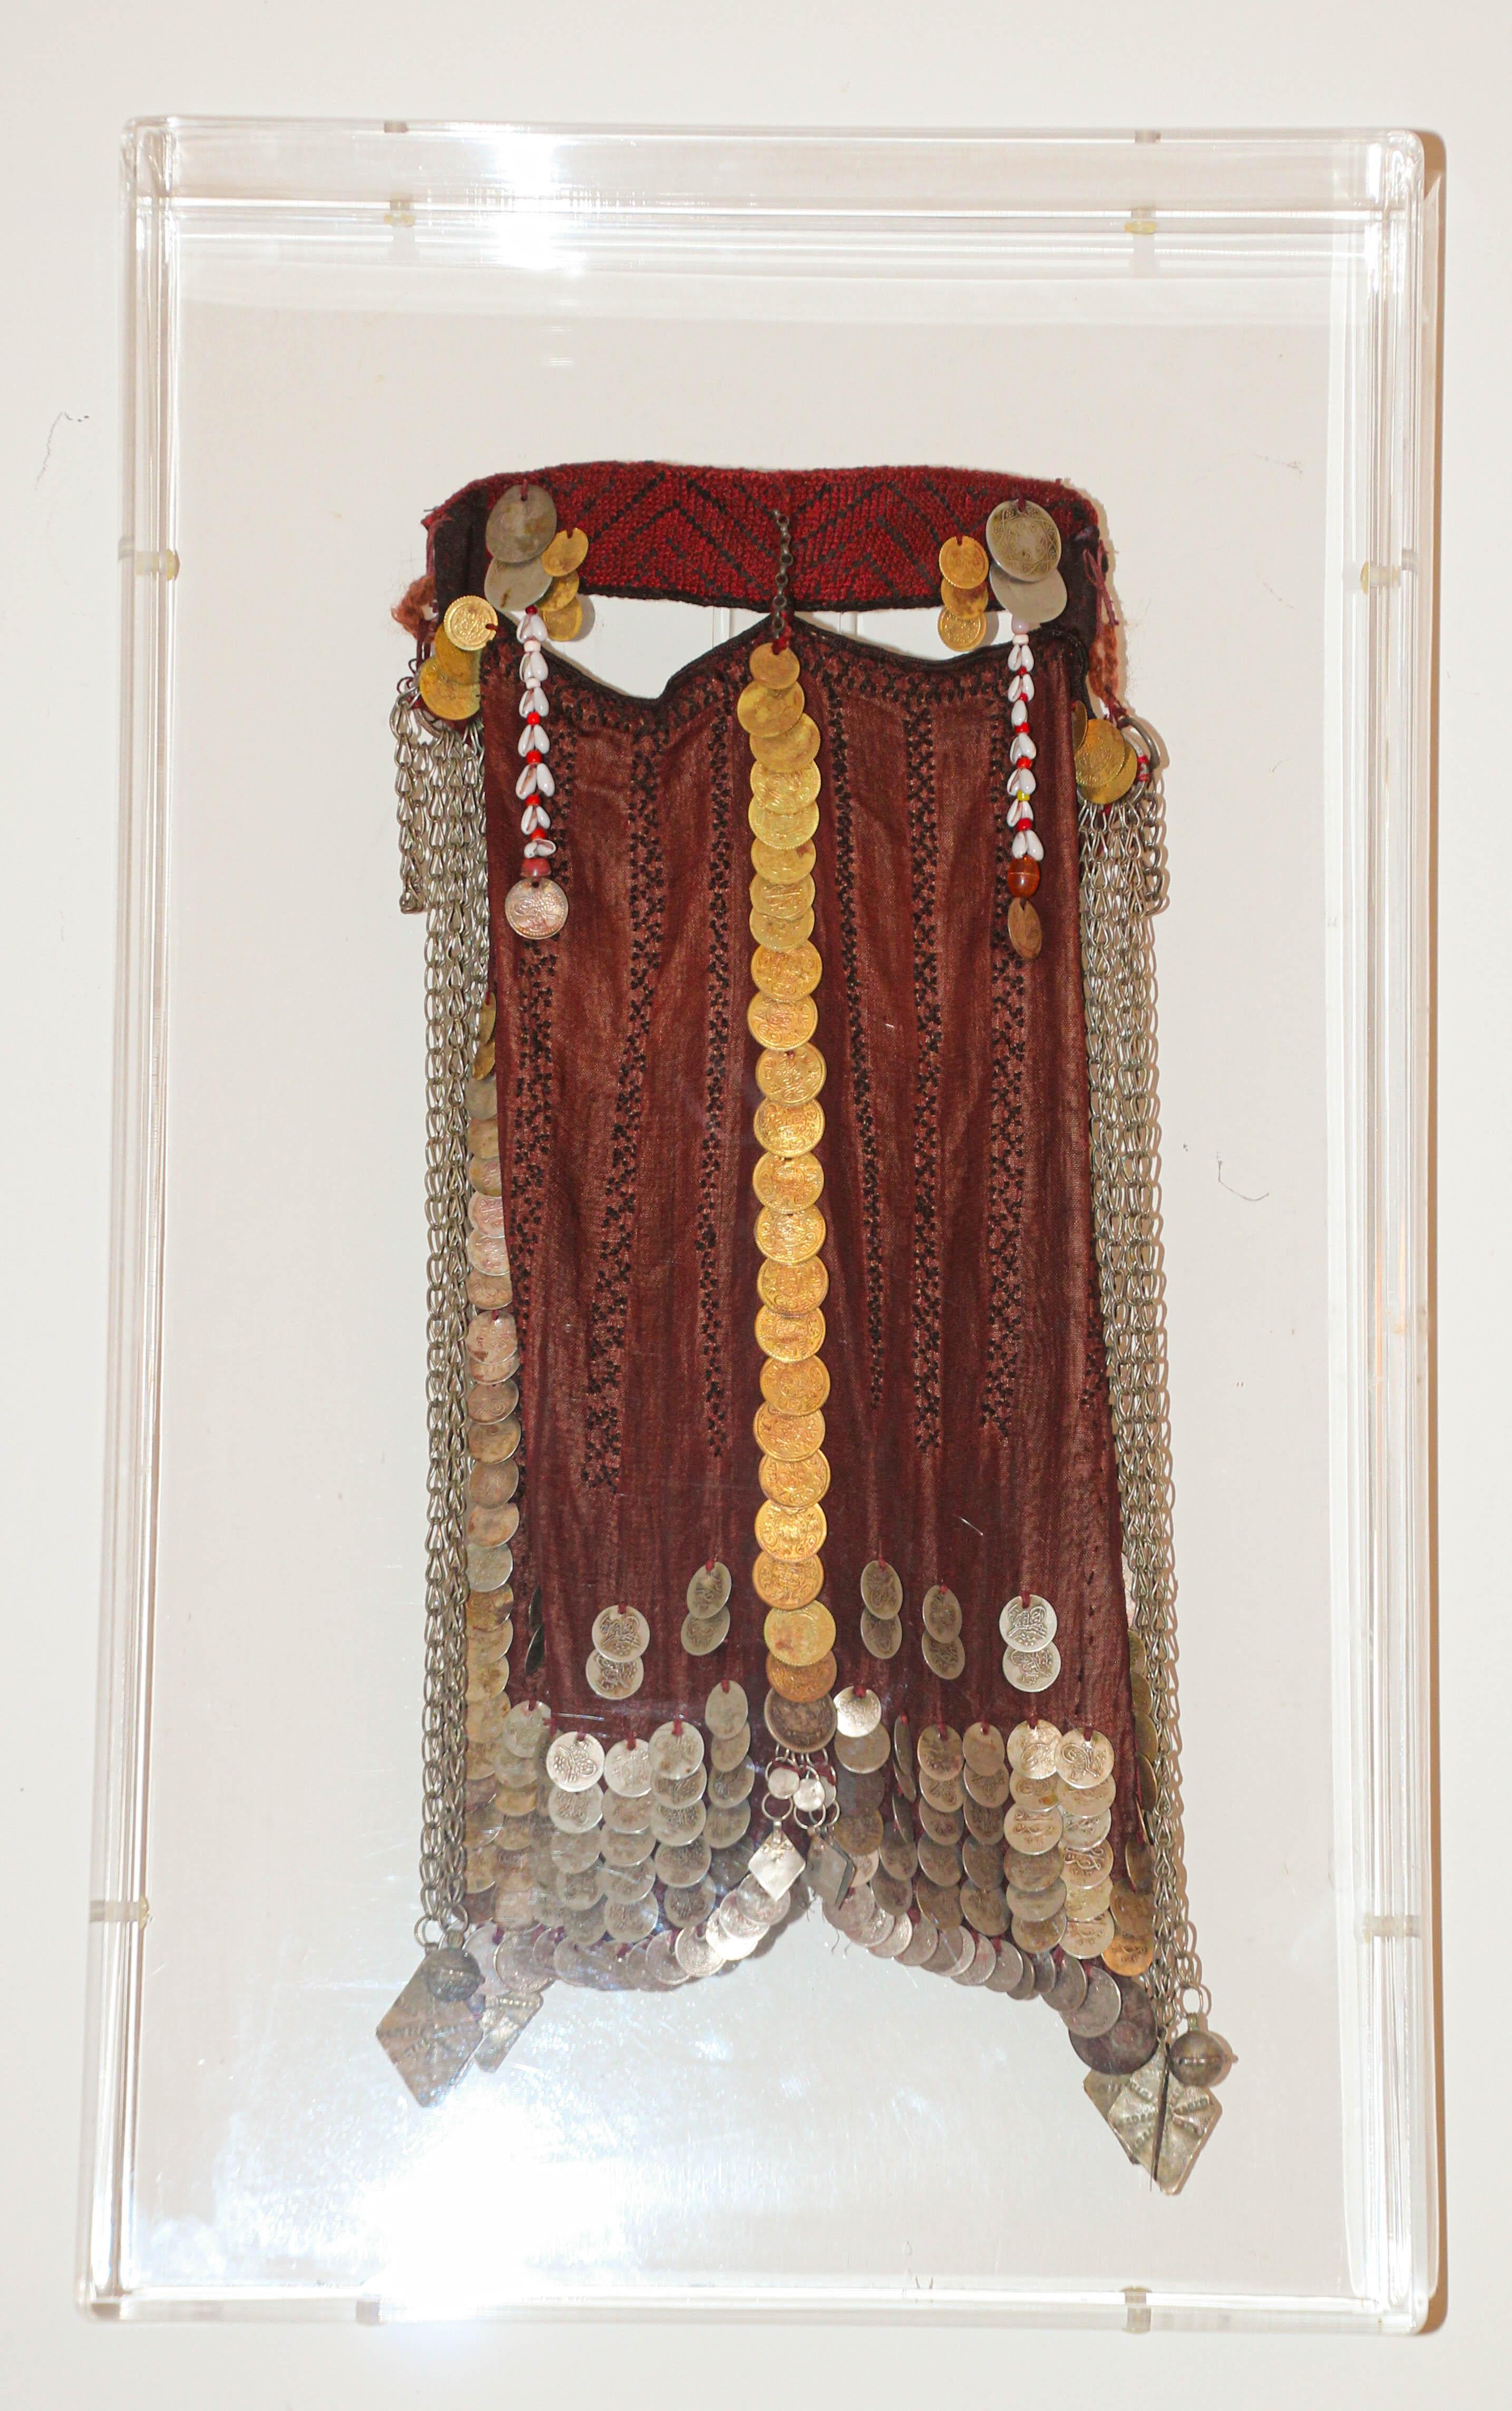 Traditional antique circa 1940s Collectible women face veil from the Sinai Bedouin Desert Garment Nikab framed in a lucite box.
Museum quality well preserved Middle Eastern Bedouin women face veil, from the Bedouin tribes of the Sinai Desert.
Face